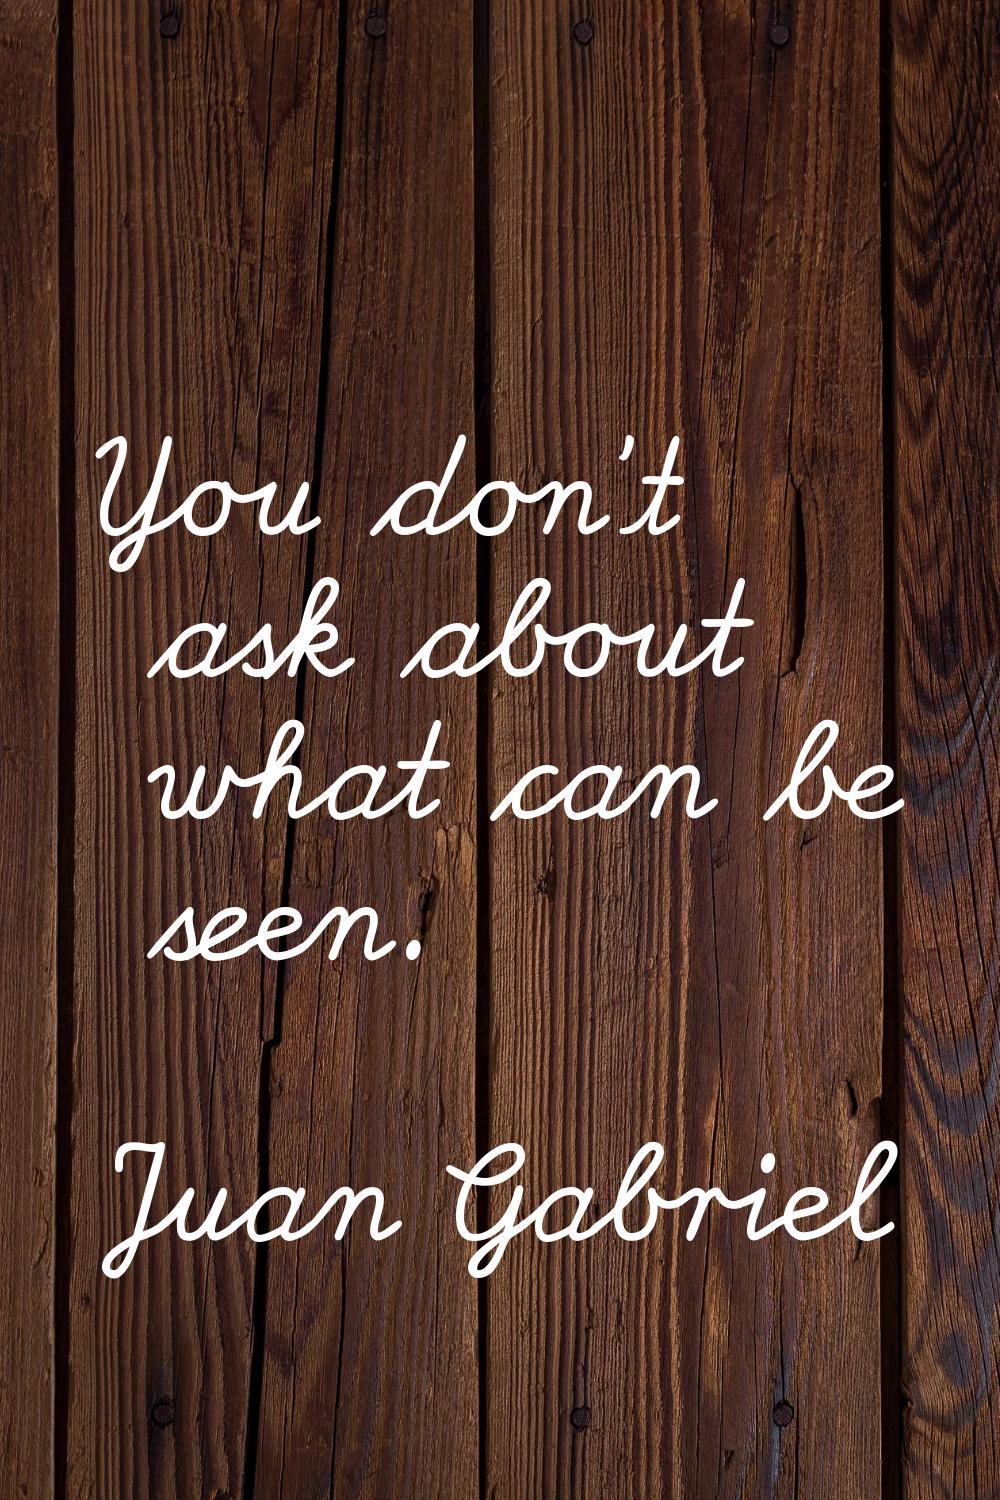 You don't ask about what can be seen.